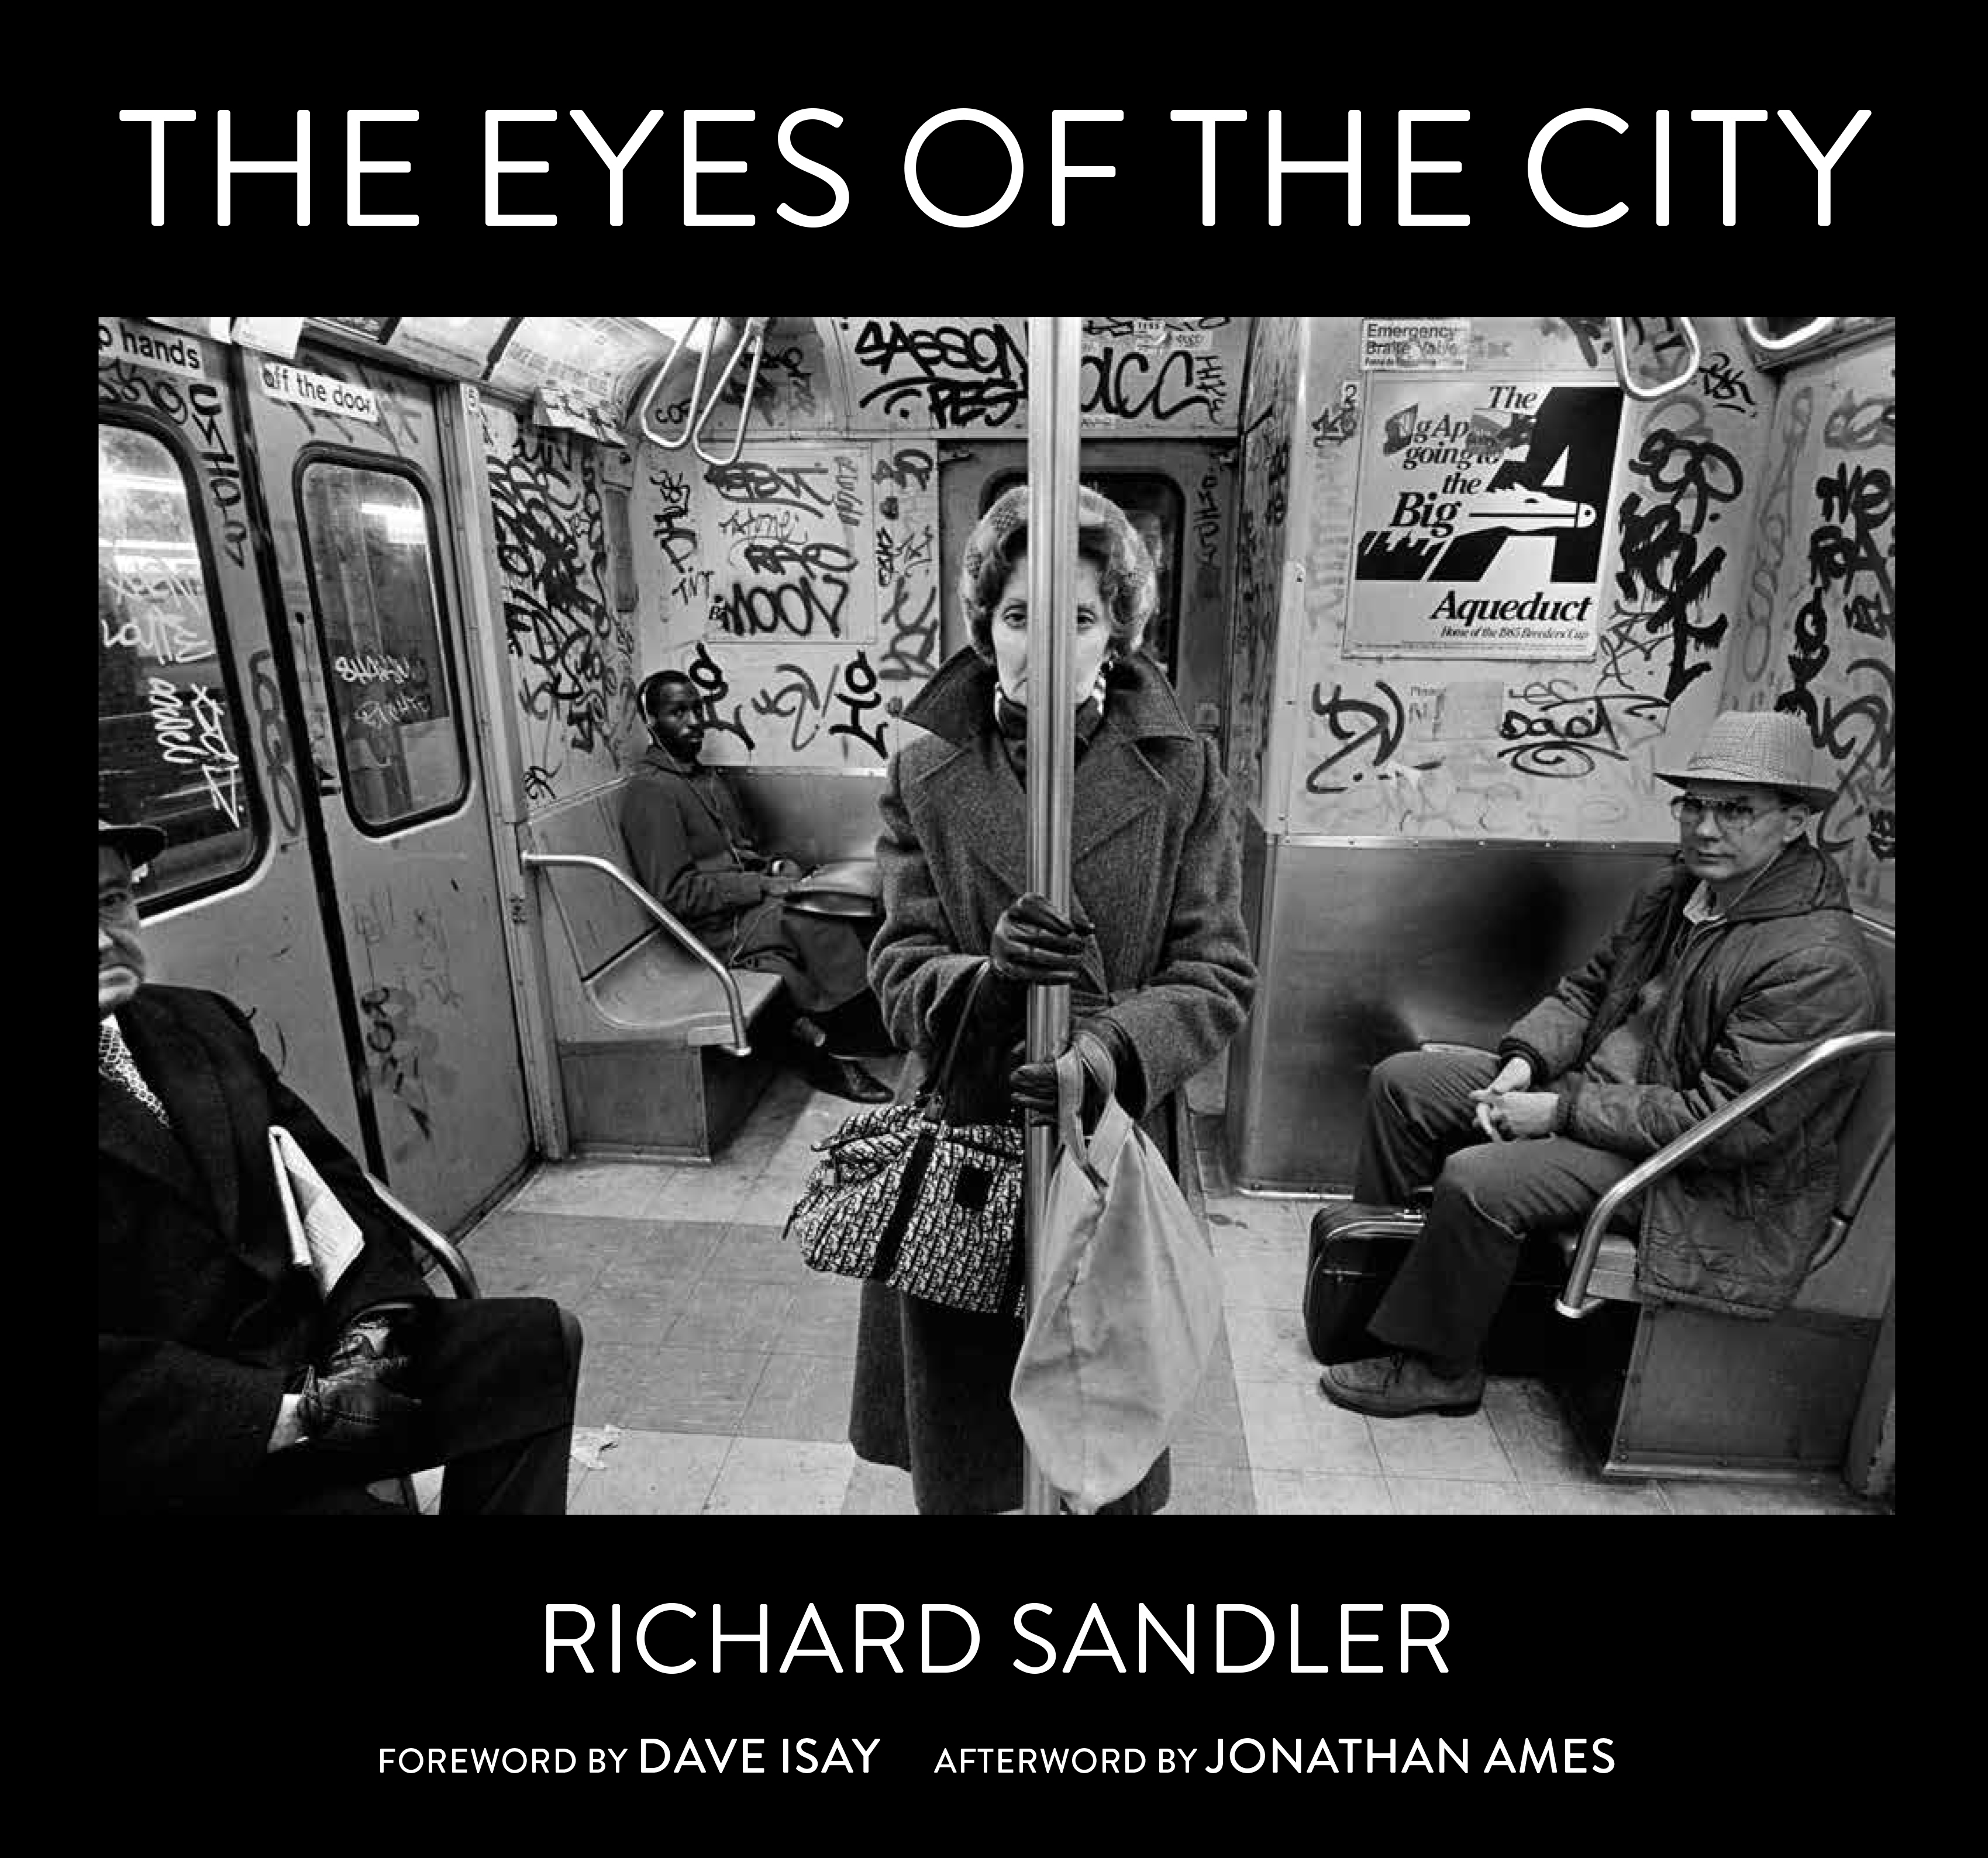 powerHouse Books Launch: The Eyes of the City by Richard Sandler in conversation with Mark Bussell and Régina Monfort